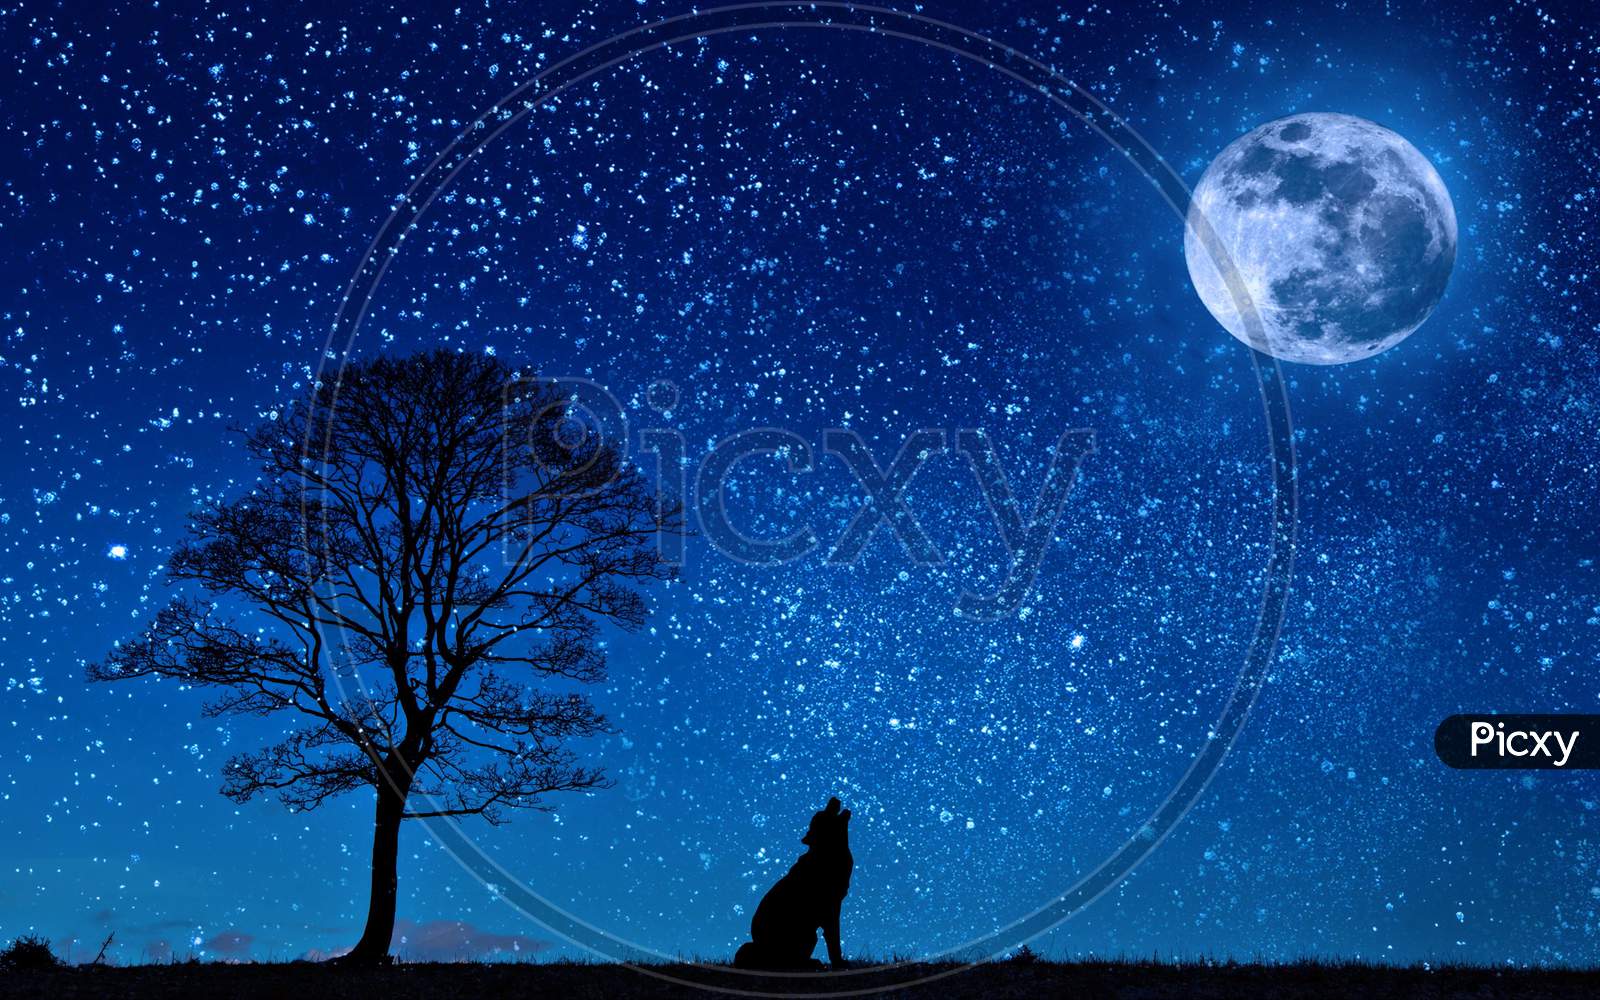 Scenic Landscape Of An Howling Fox During The Full Moon With Starry Sky During Night.